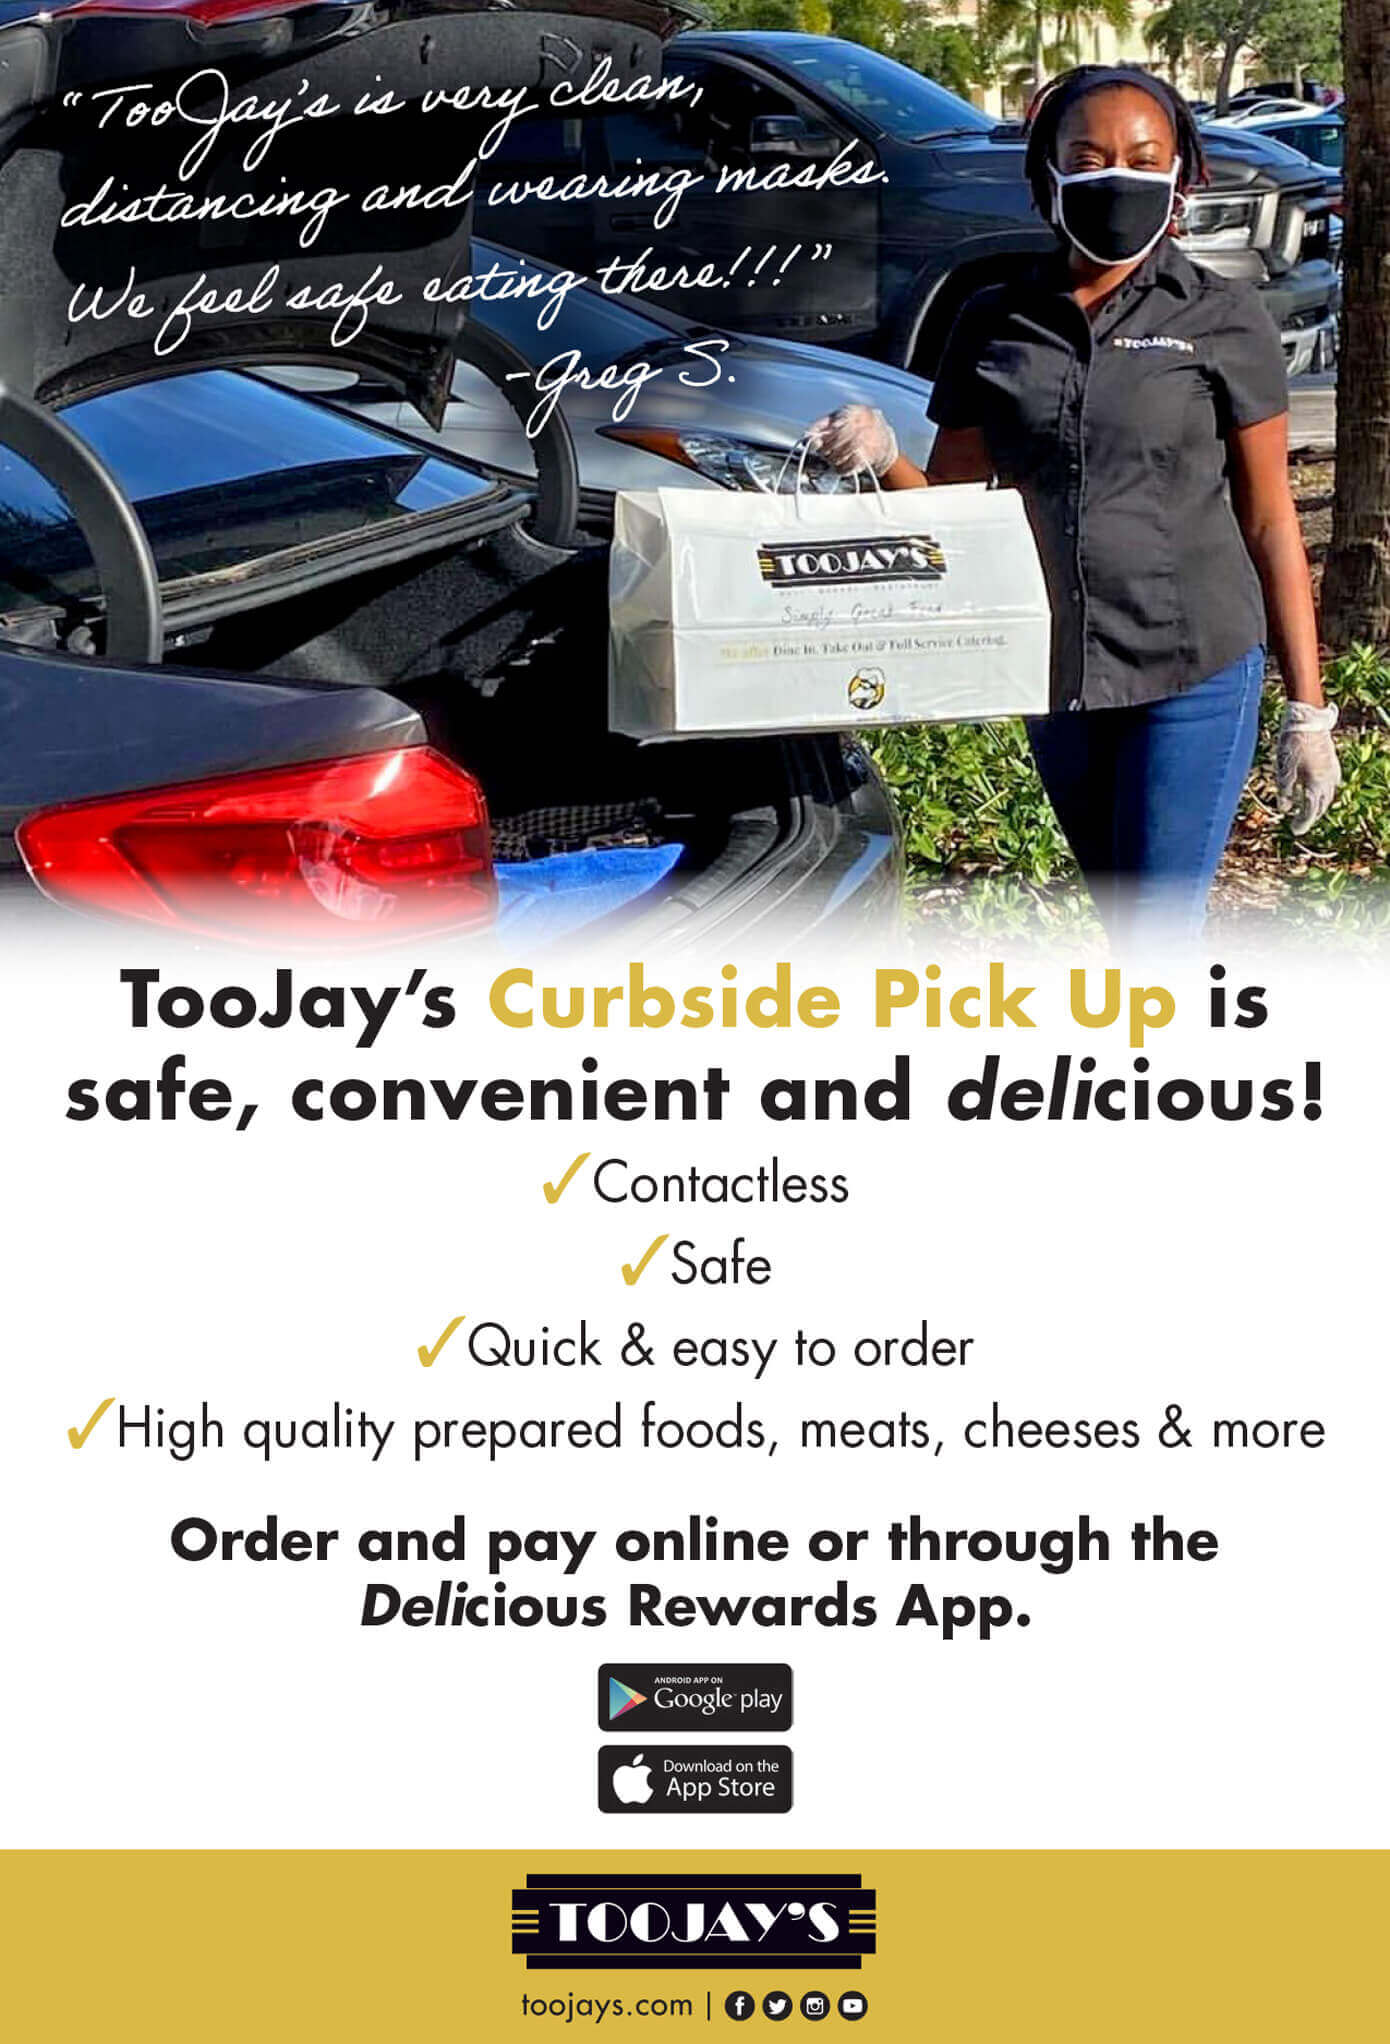 TooJay's Curbside Pick Up is safe, convenient and delicious. Order and pay online or through the Delicious Rewards App.